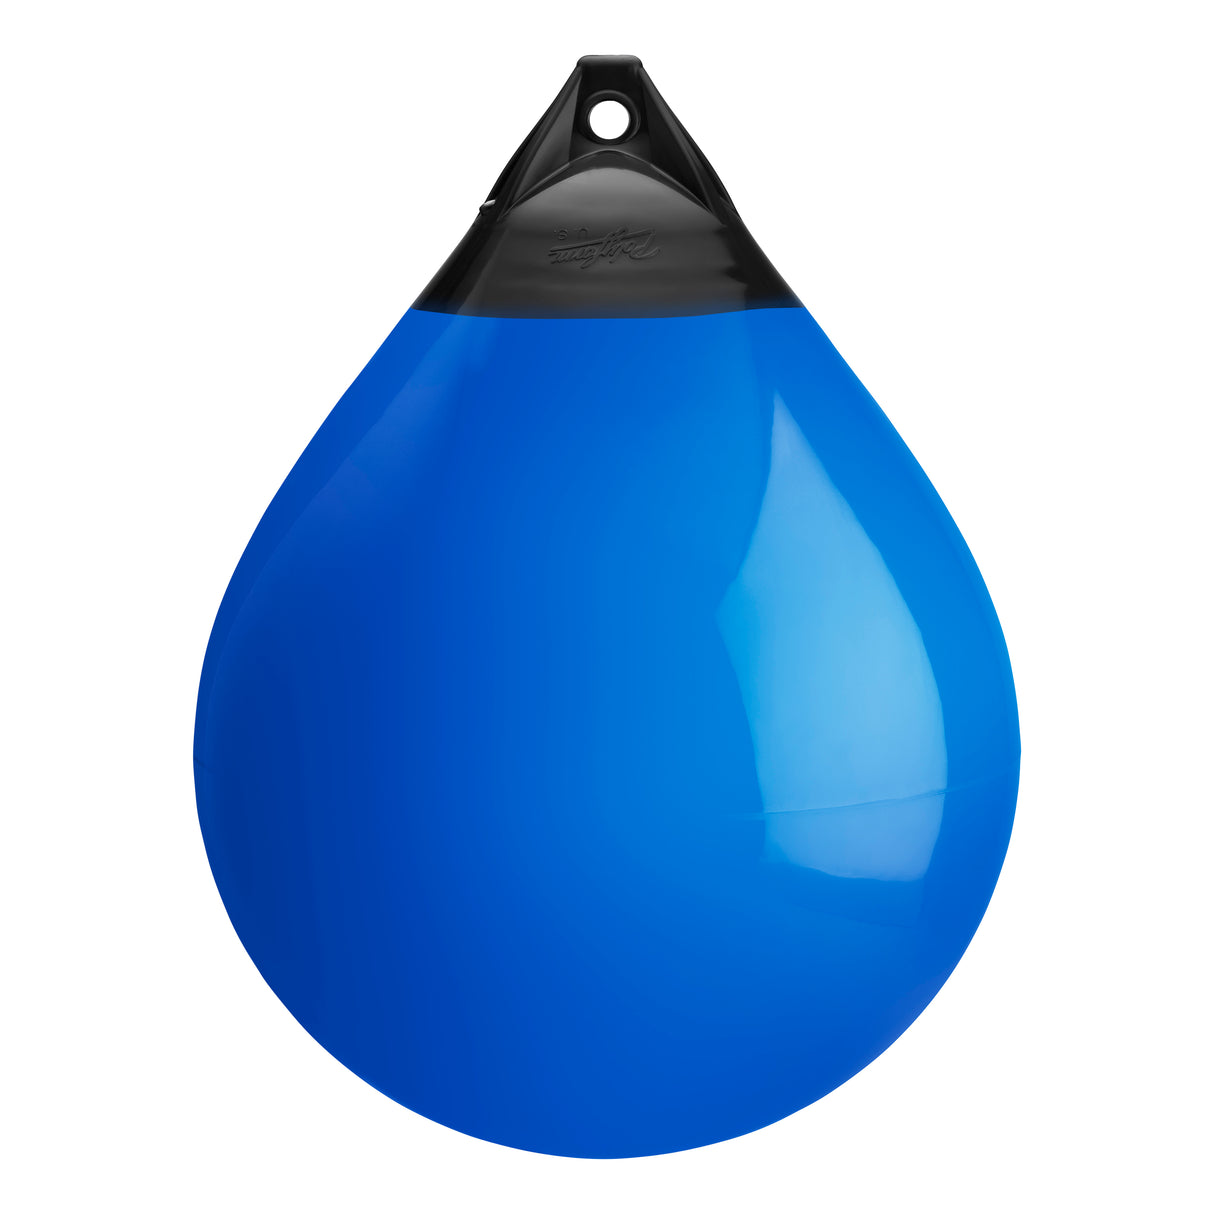 Blue buoy with Black-Top, Polyform A-6